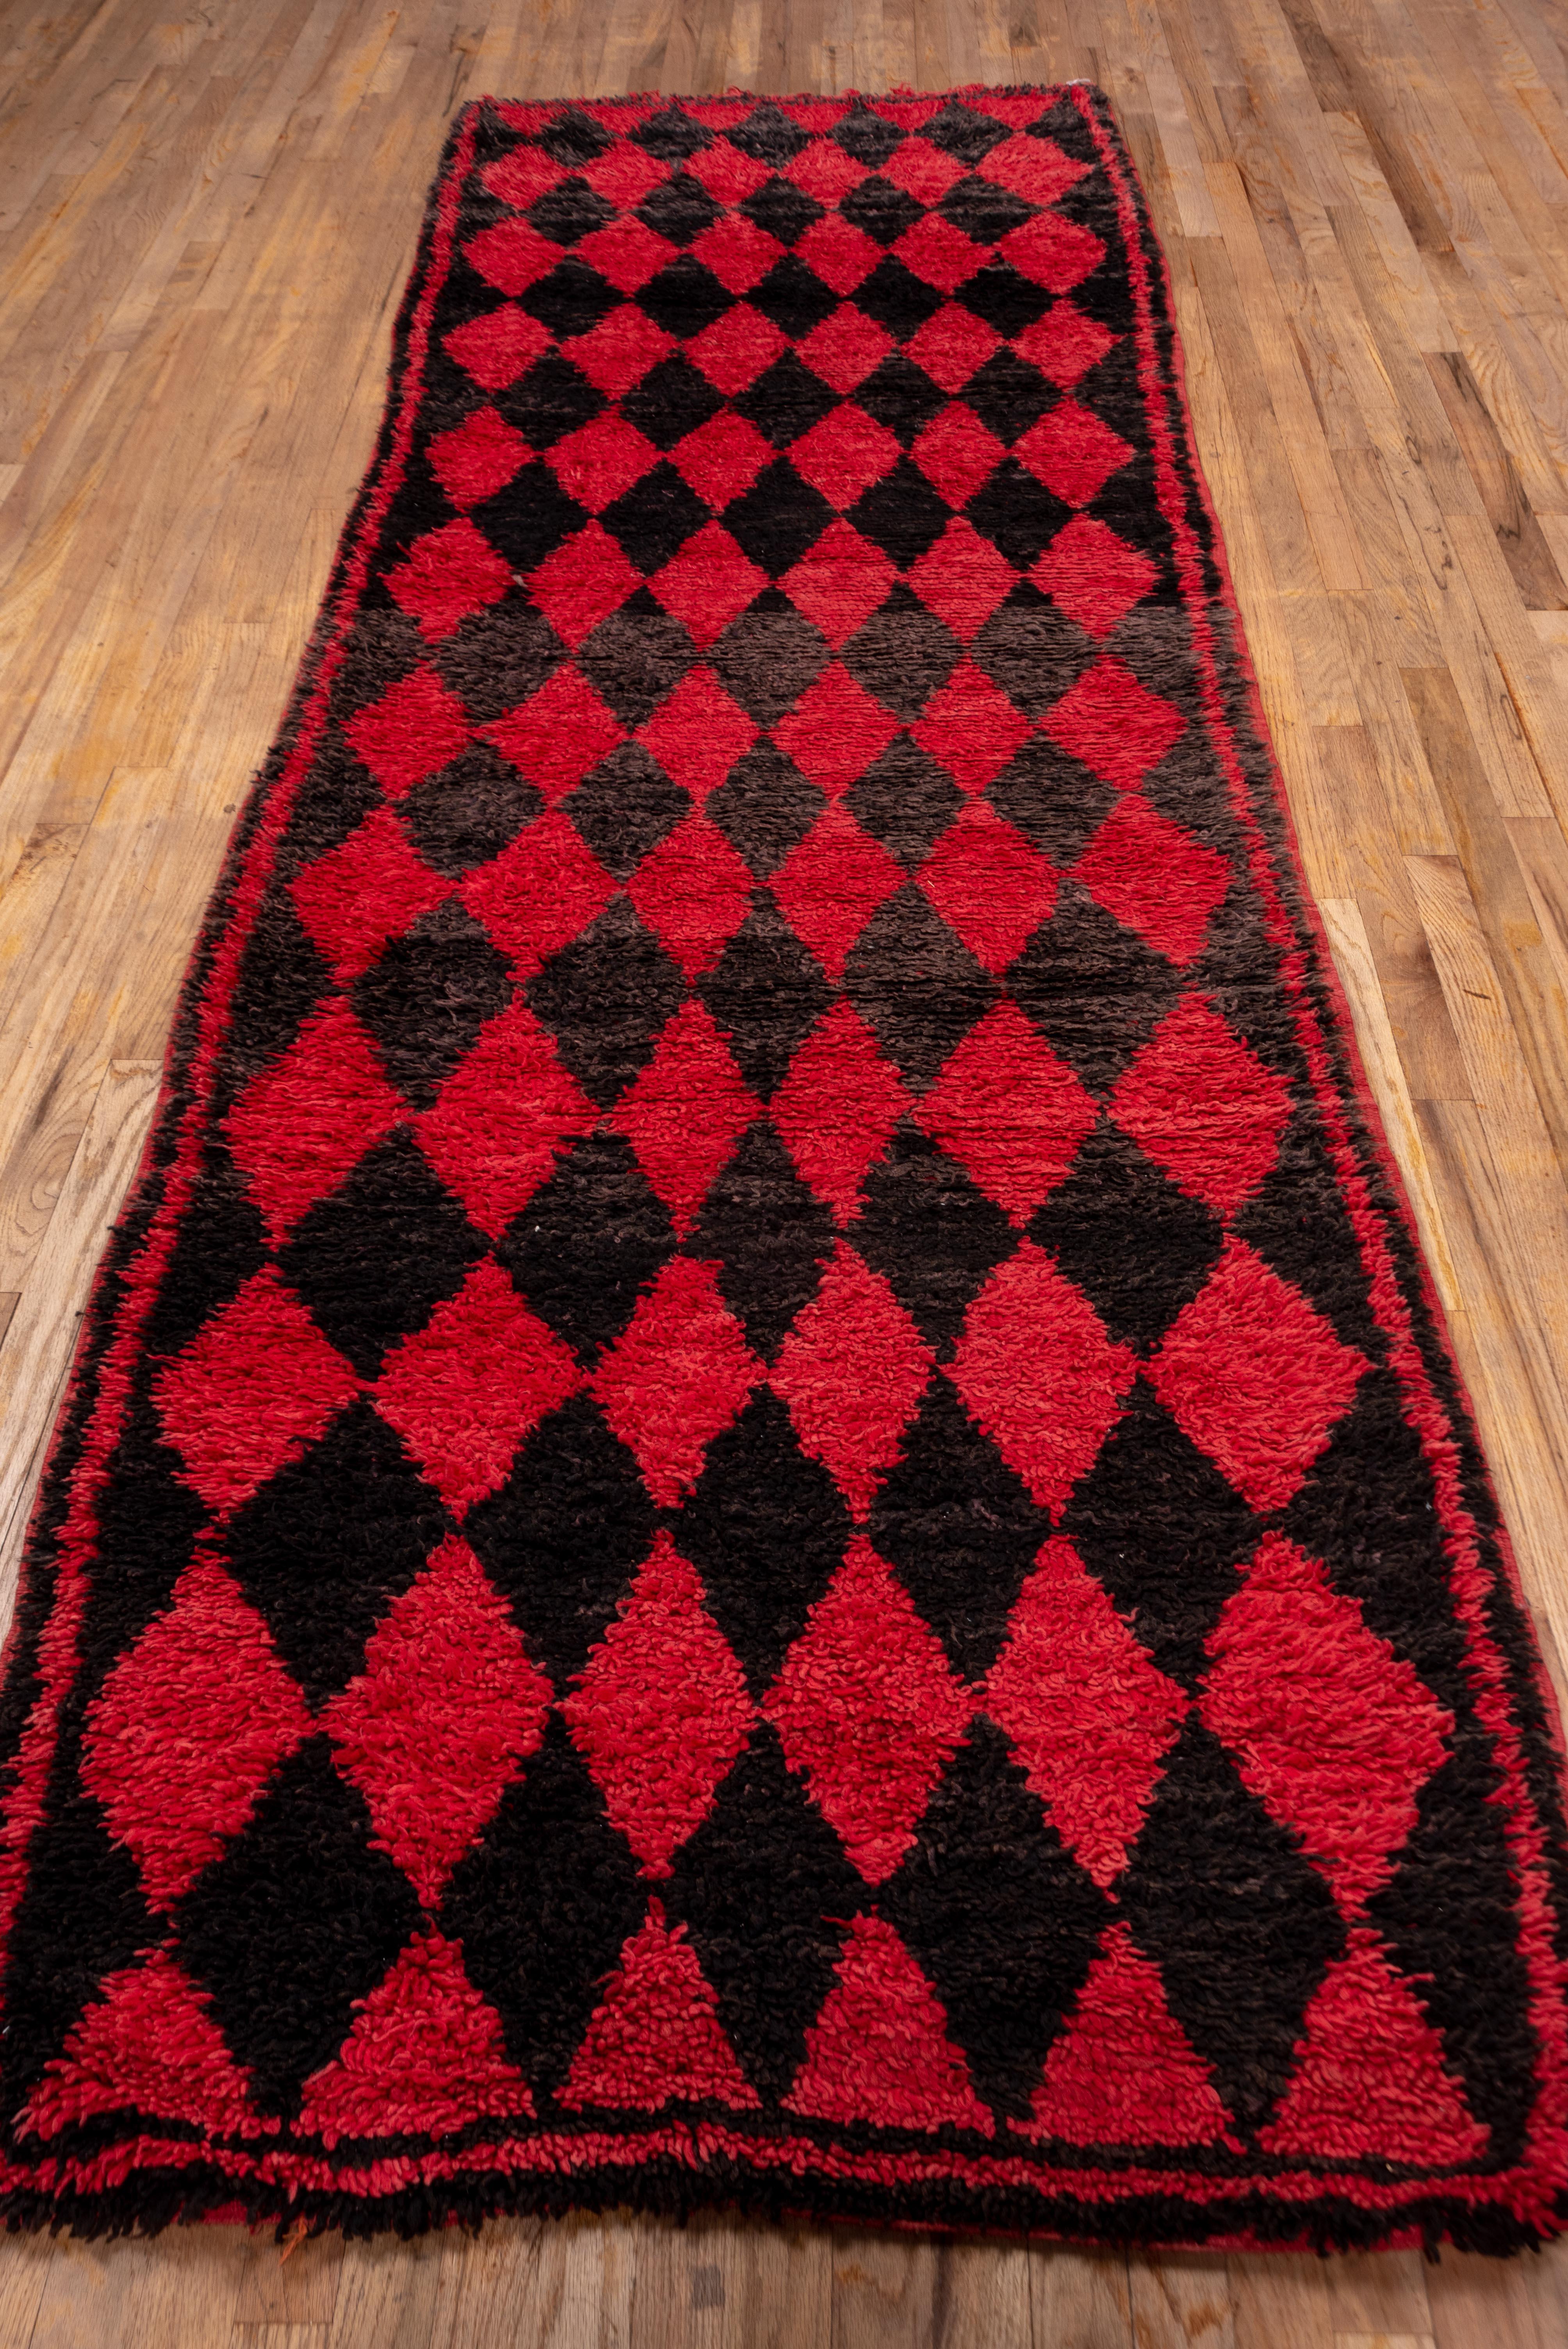 Black and red diamond tribal wool rug - made in Morocco